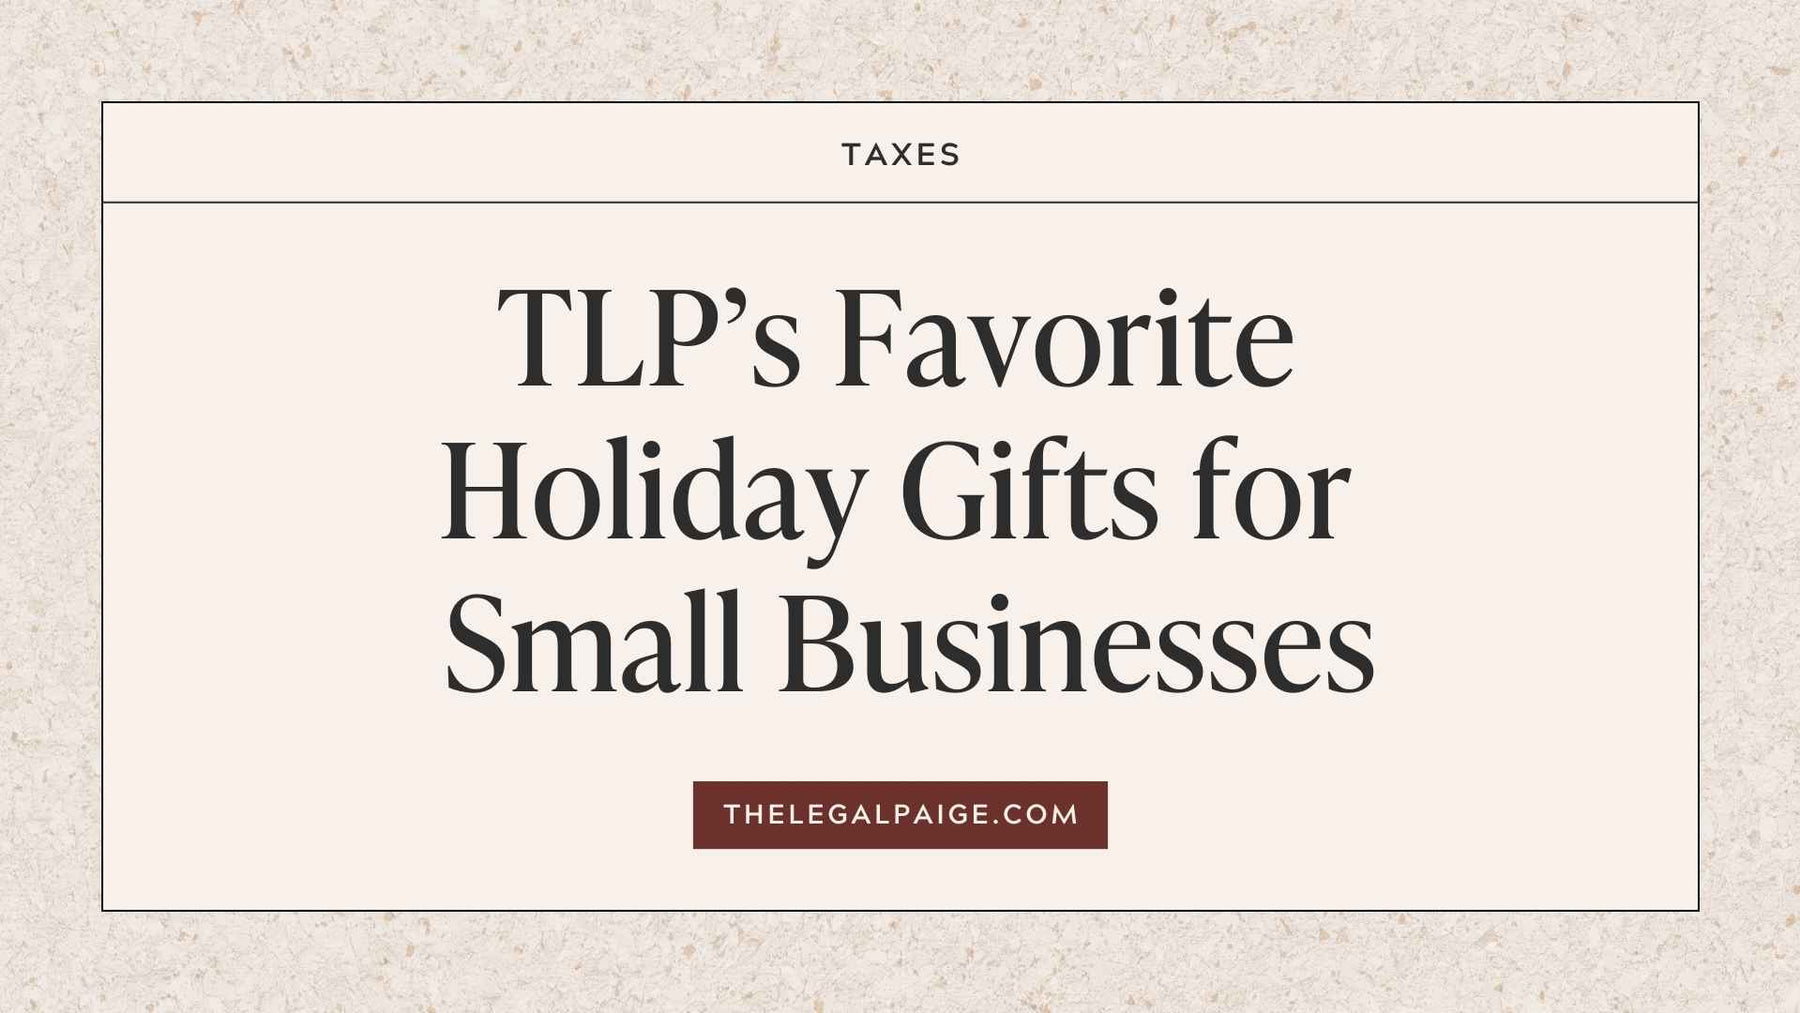 TLP’s Favorite Holiday Gifts for Small Businesses